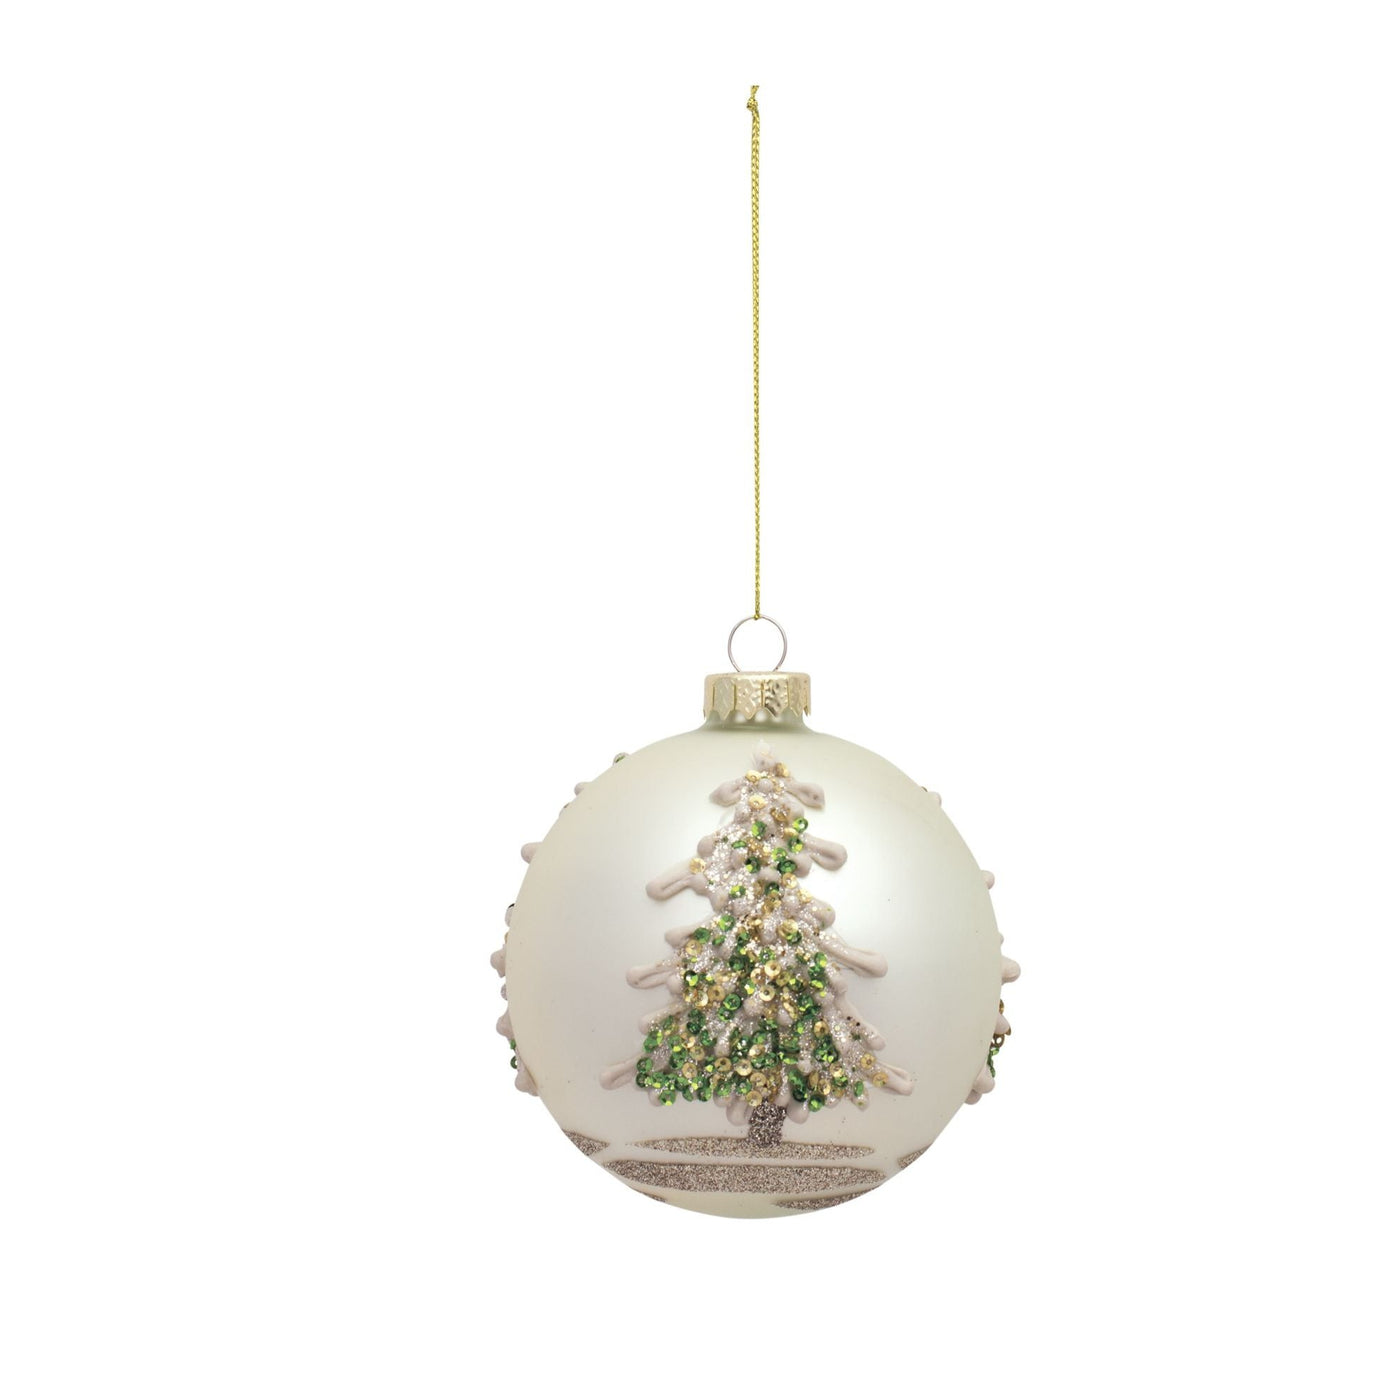 Glass Christmas Tree Ornament-Home/Giftware-Round-Kevin's Fine Outdoor Gear & Apparel